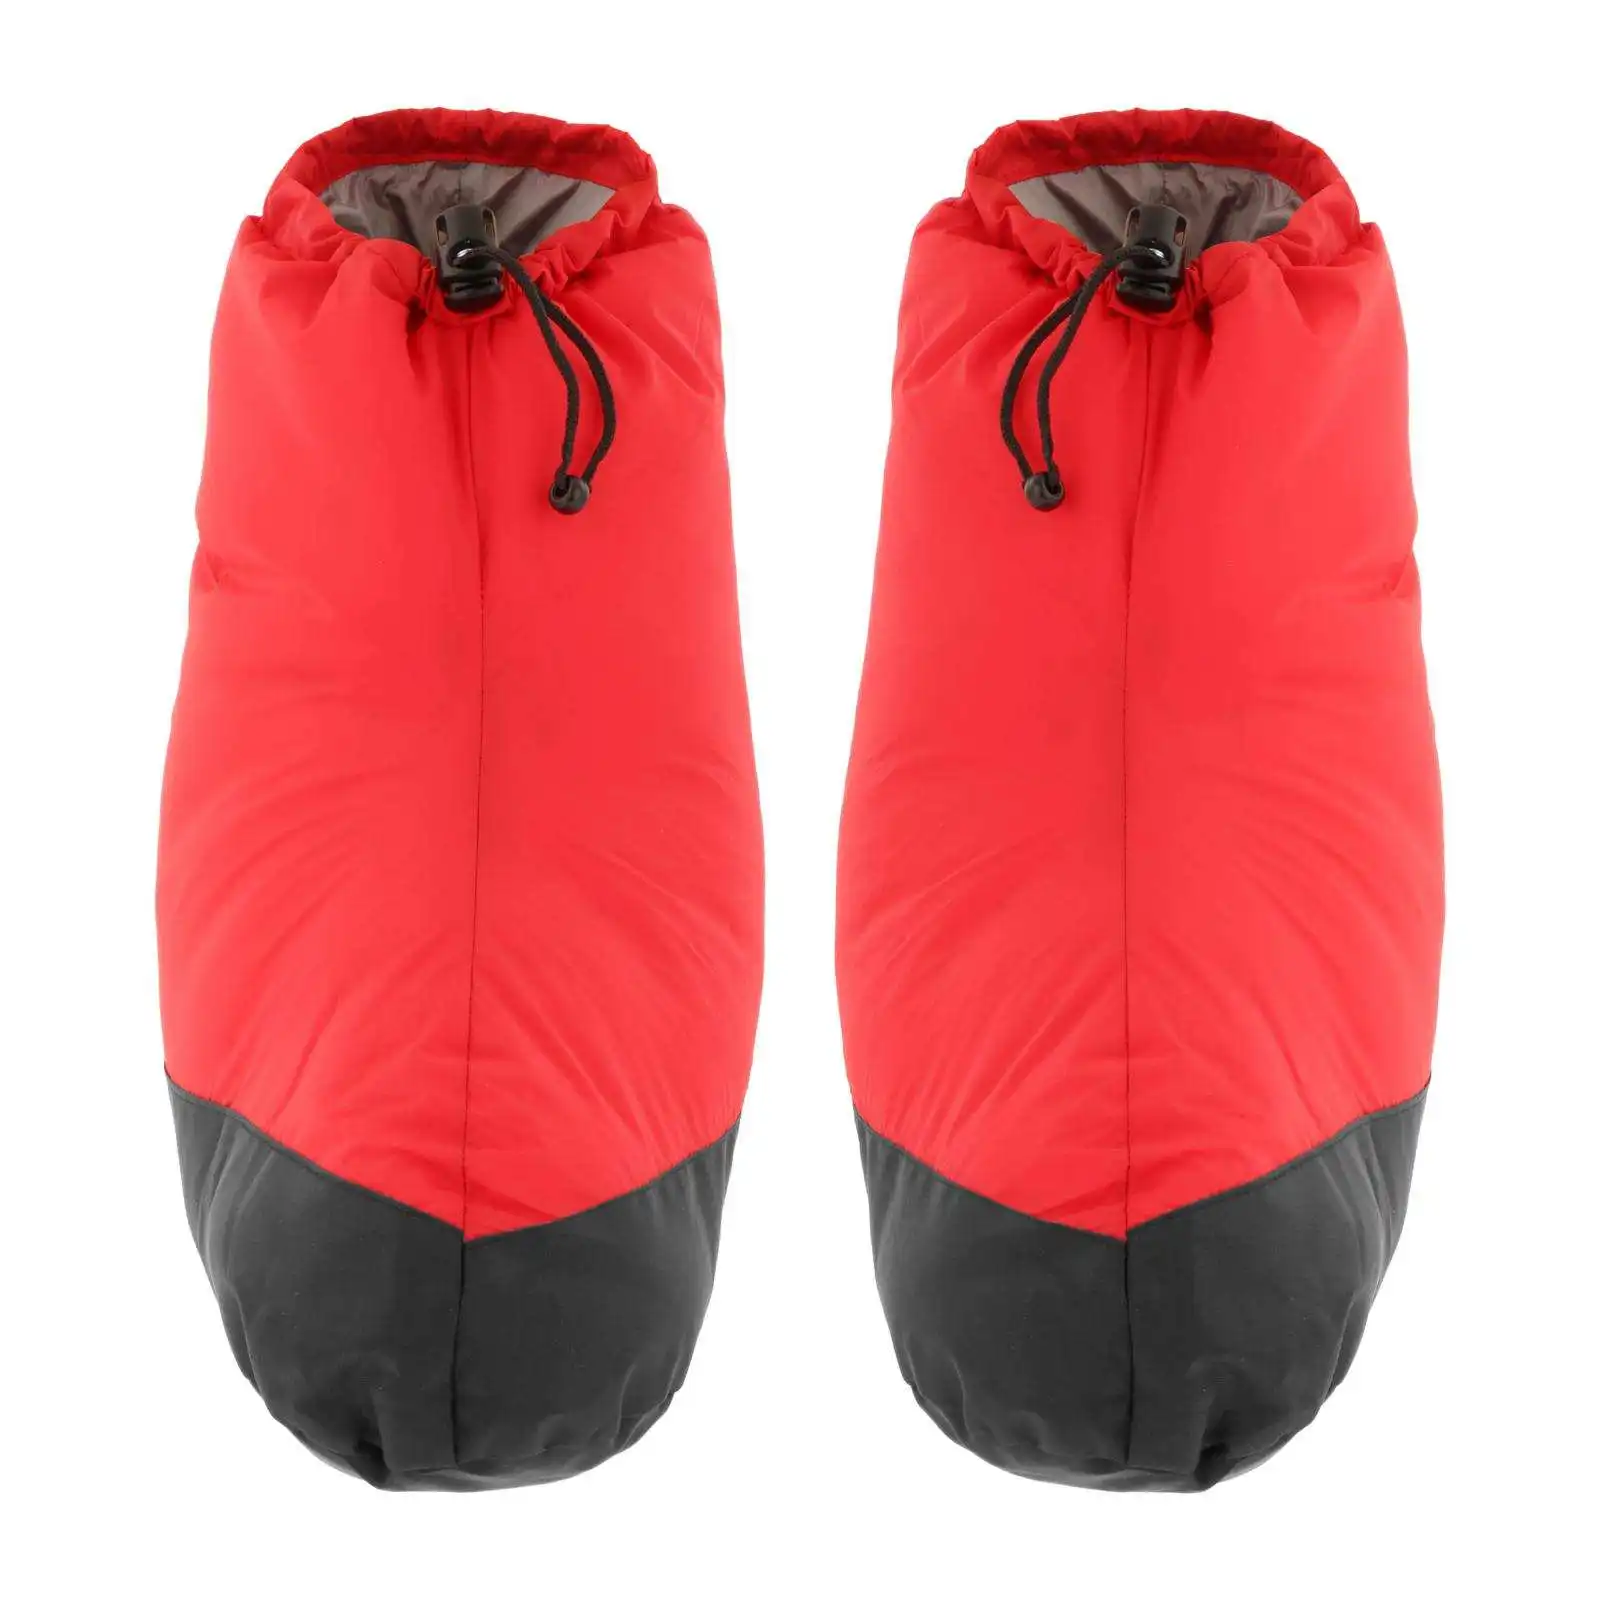 Down Booties Water-Resistant Warm Ultralight Winter Down Filled Slipper Boots Socks Slippers for Backpacking Camping Outdoor